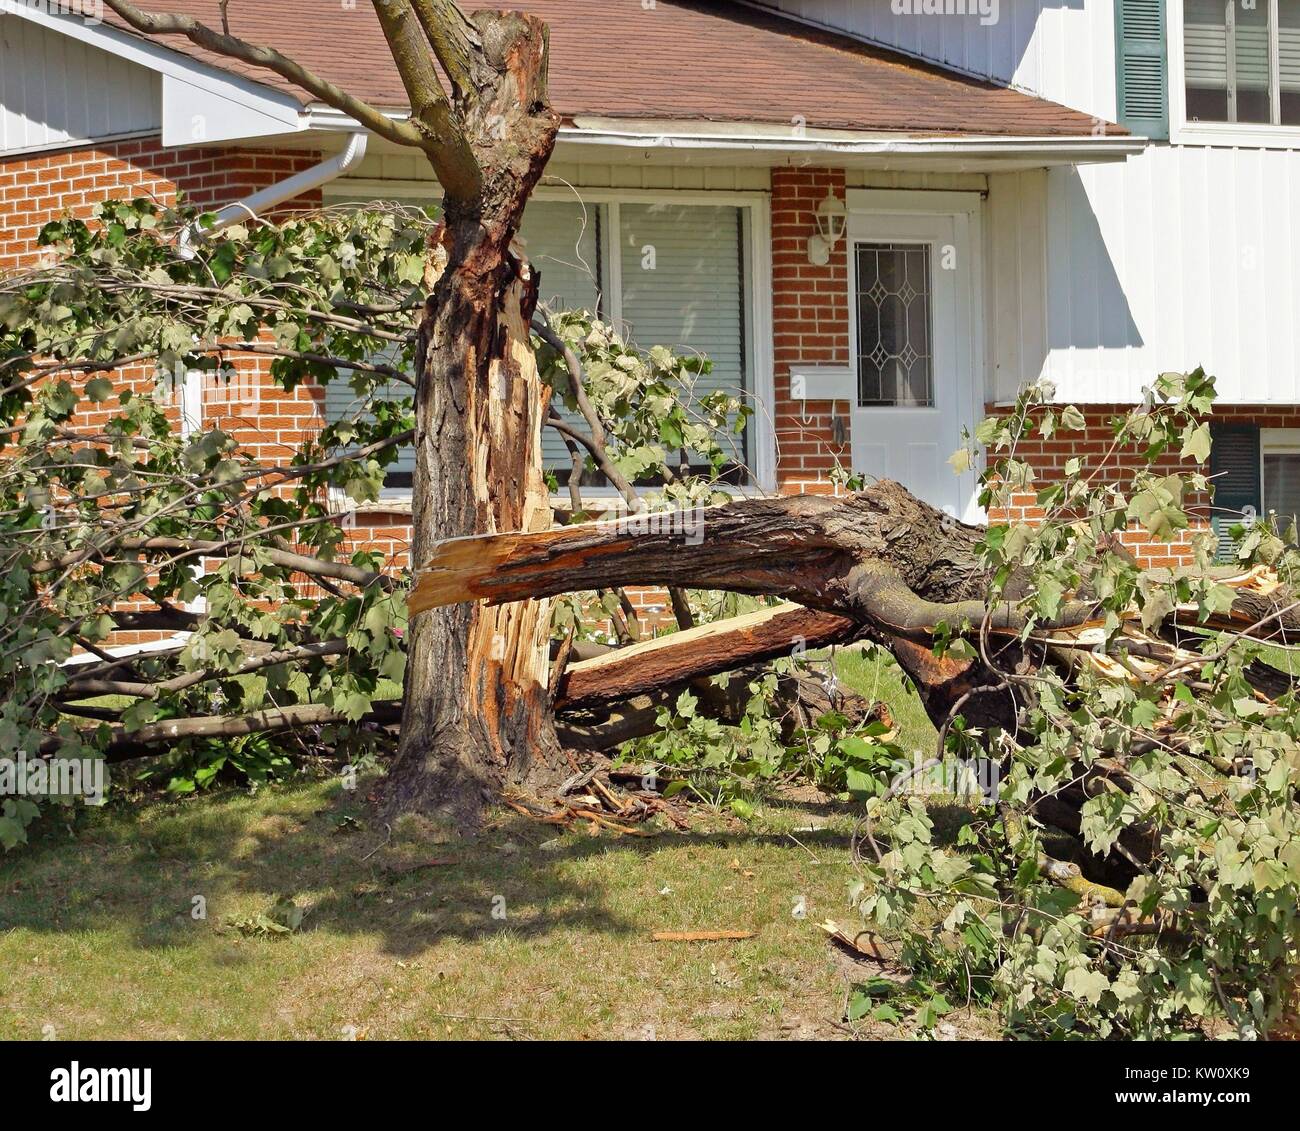 Fallen tree after a severe storm in a residential neighborhood Stock Photo